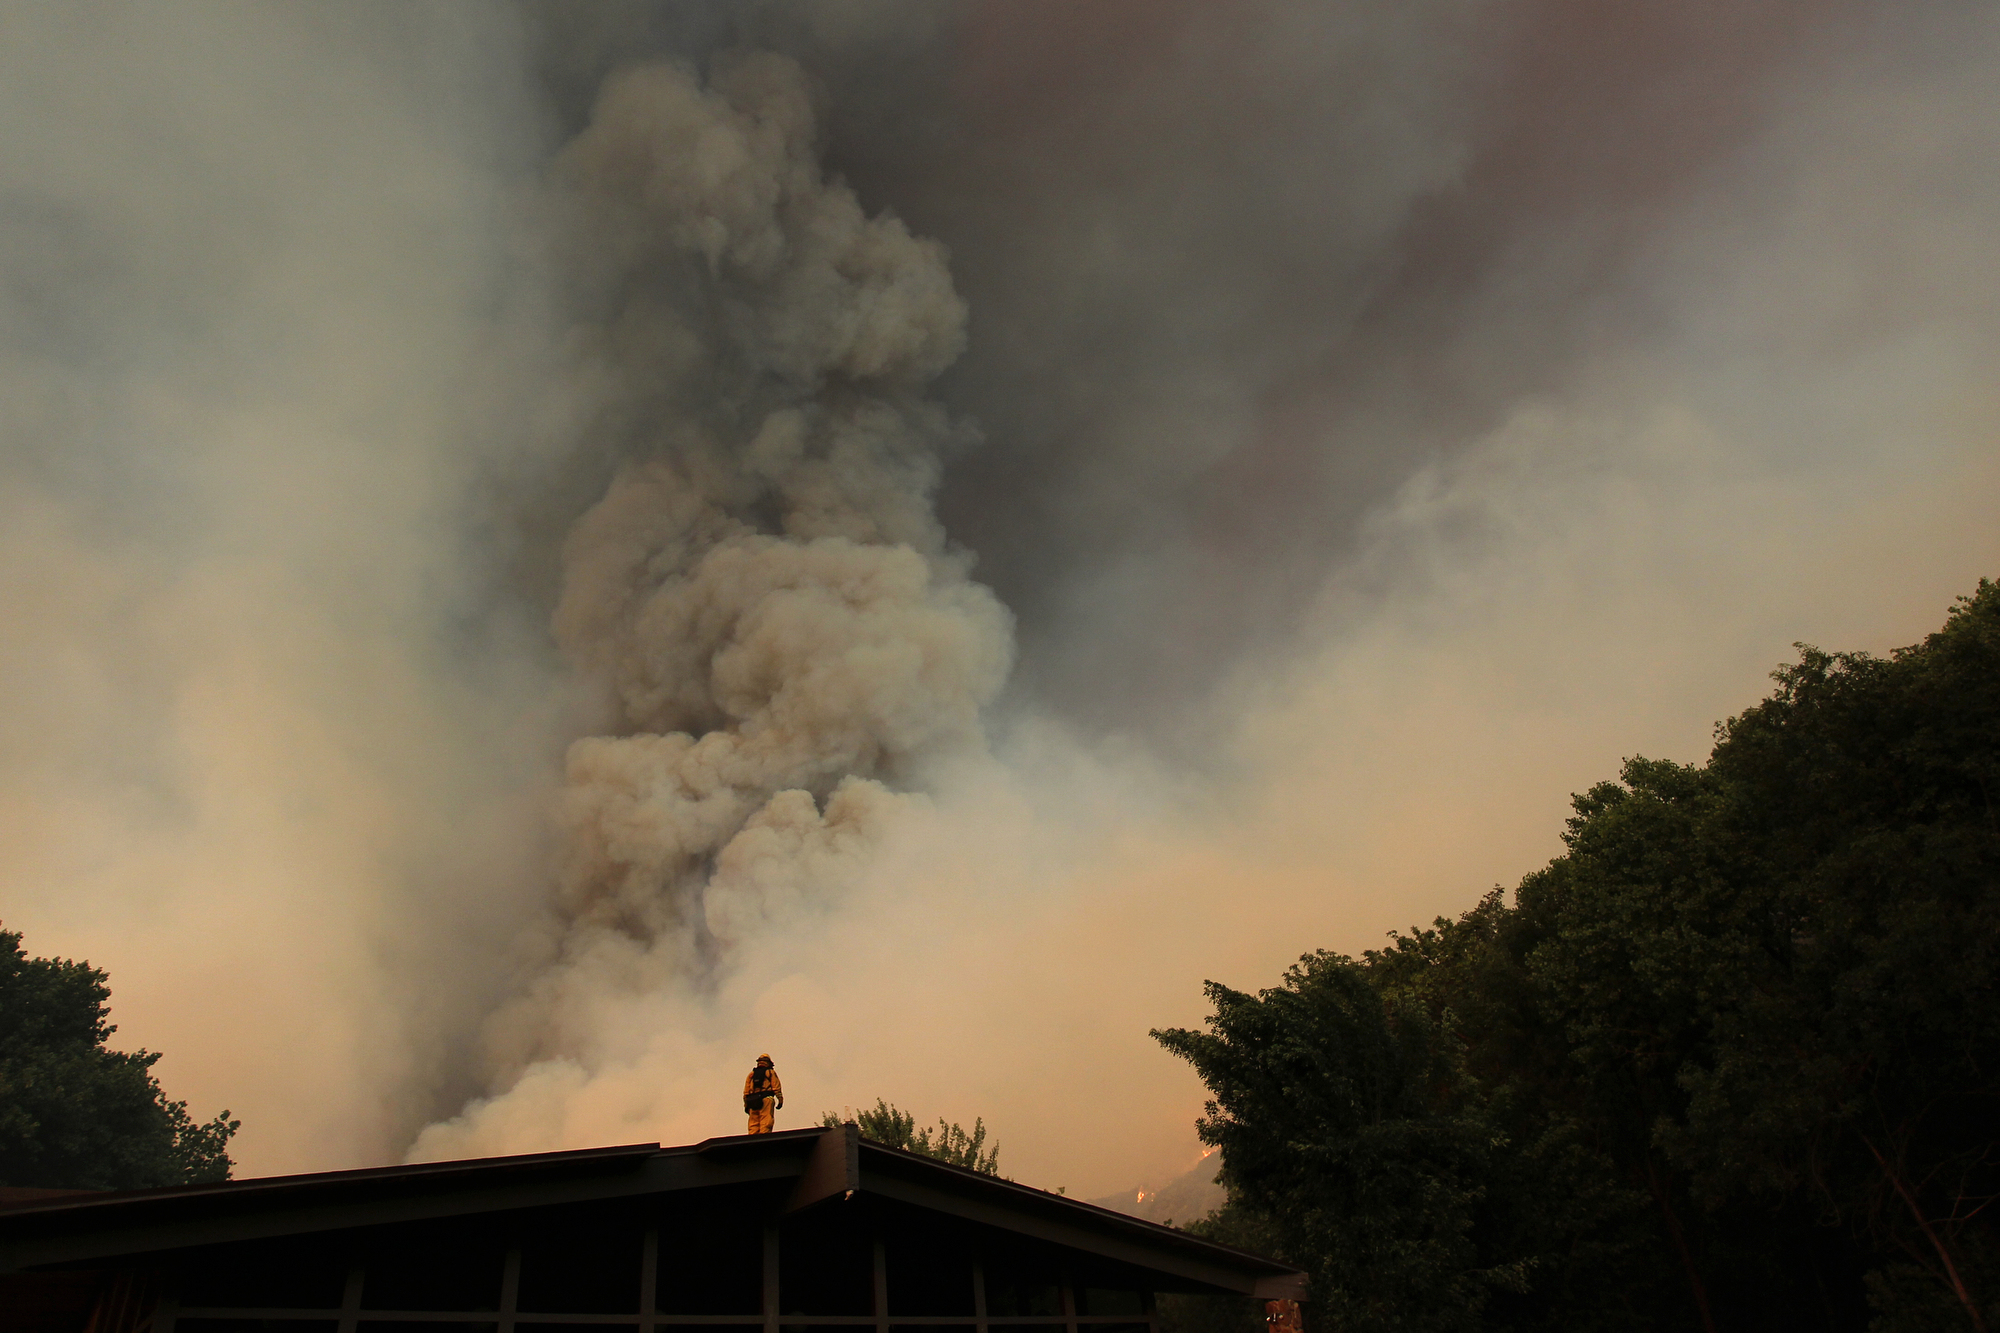 A firefighter watches from a rooftop as the Powerhouse fire closes in around the Canyon Creek Complex sports camp during a fast run toward Lake Hughes on June 1, 2013 south of Lake Hughes, Calif. The 19,500-acre wildfire destroyed numerous homes overnight.